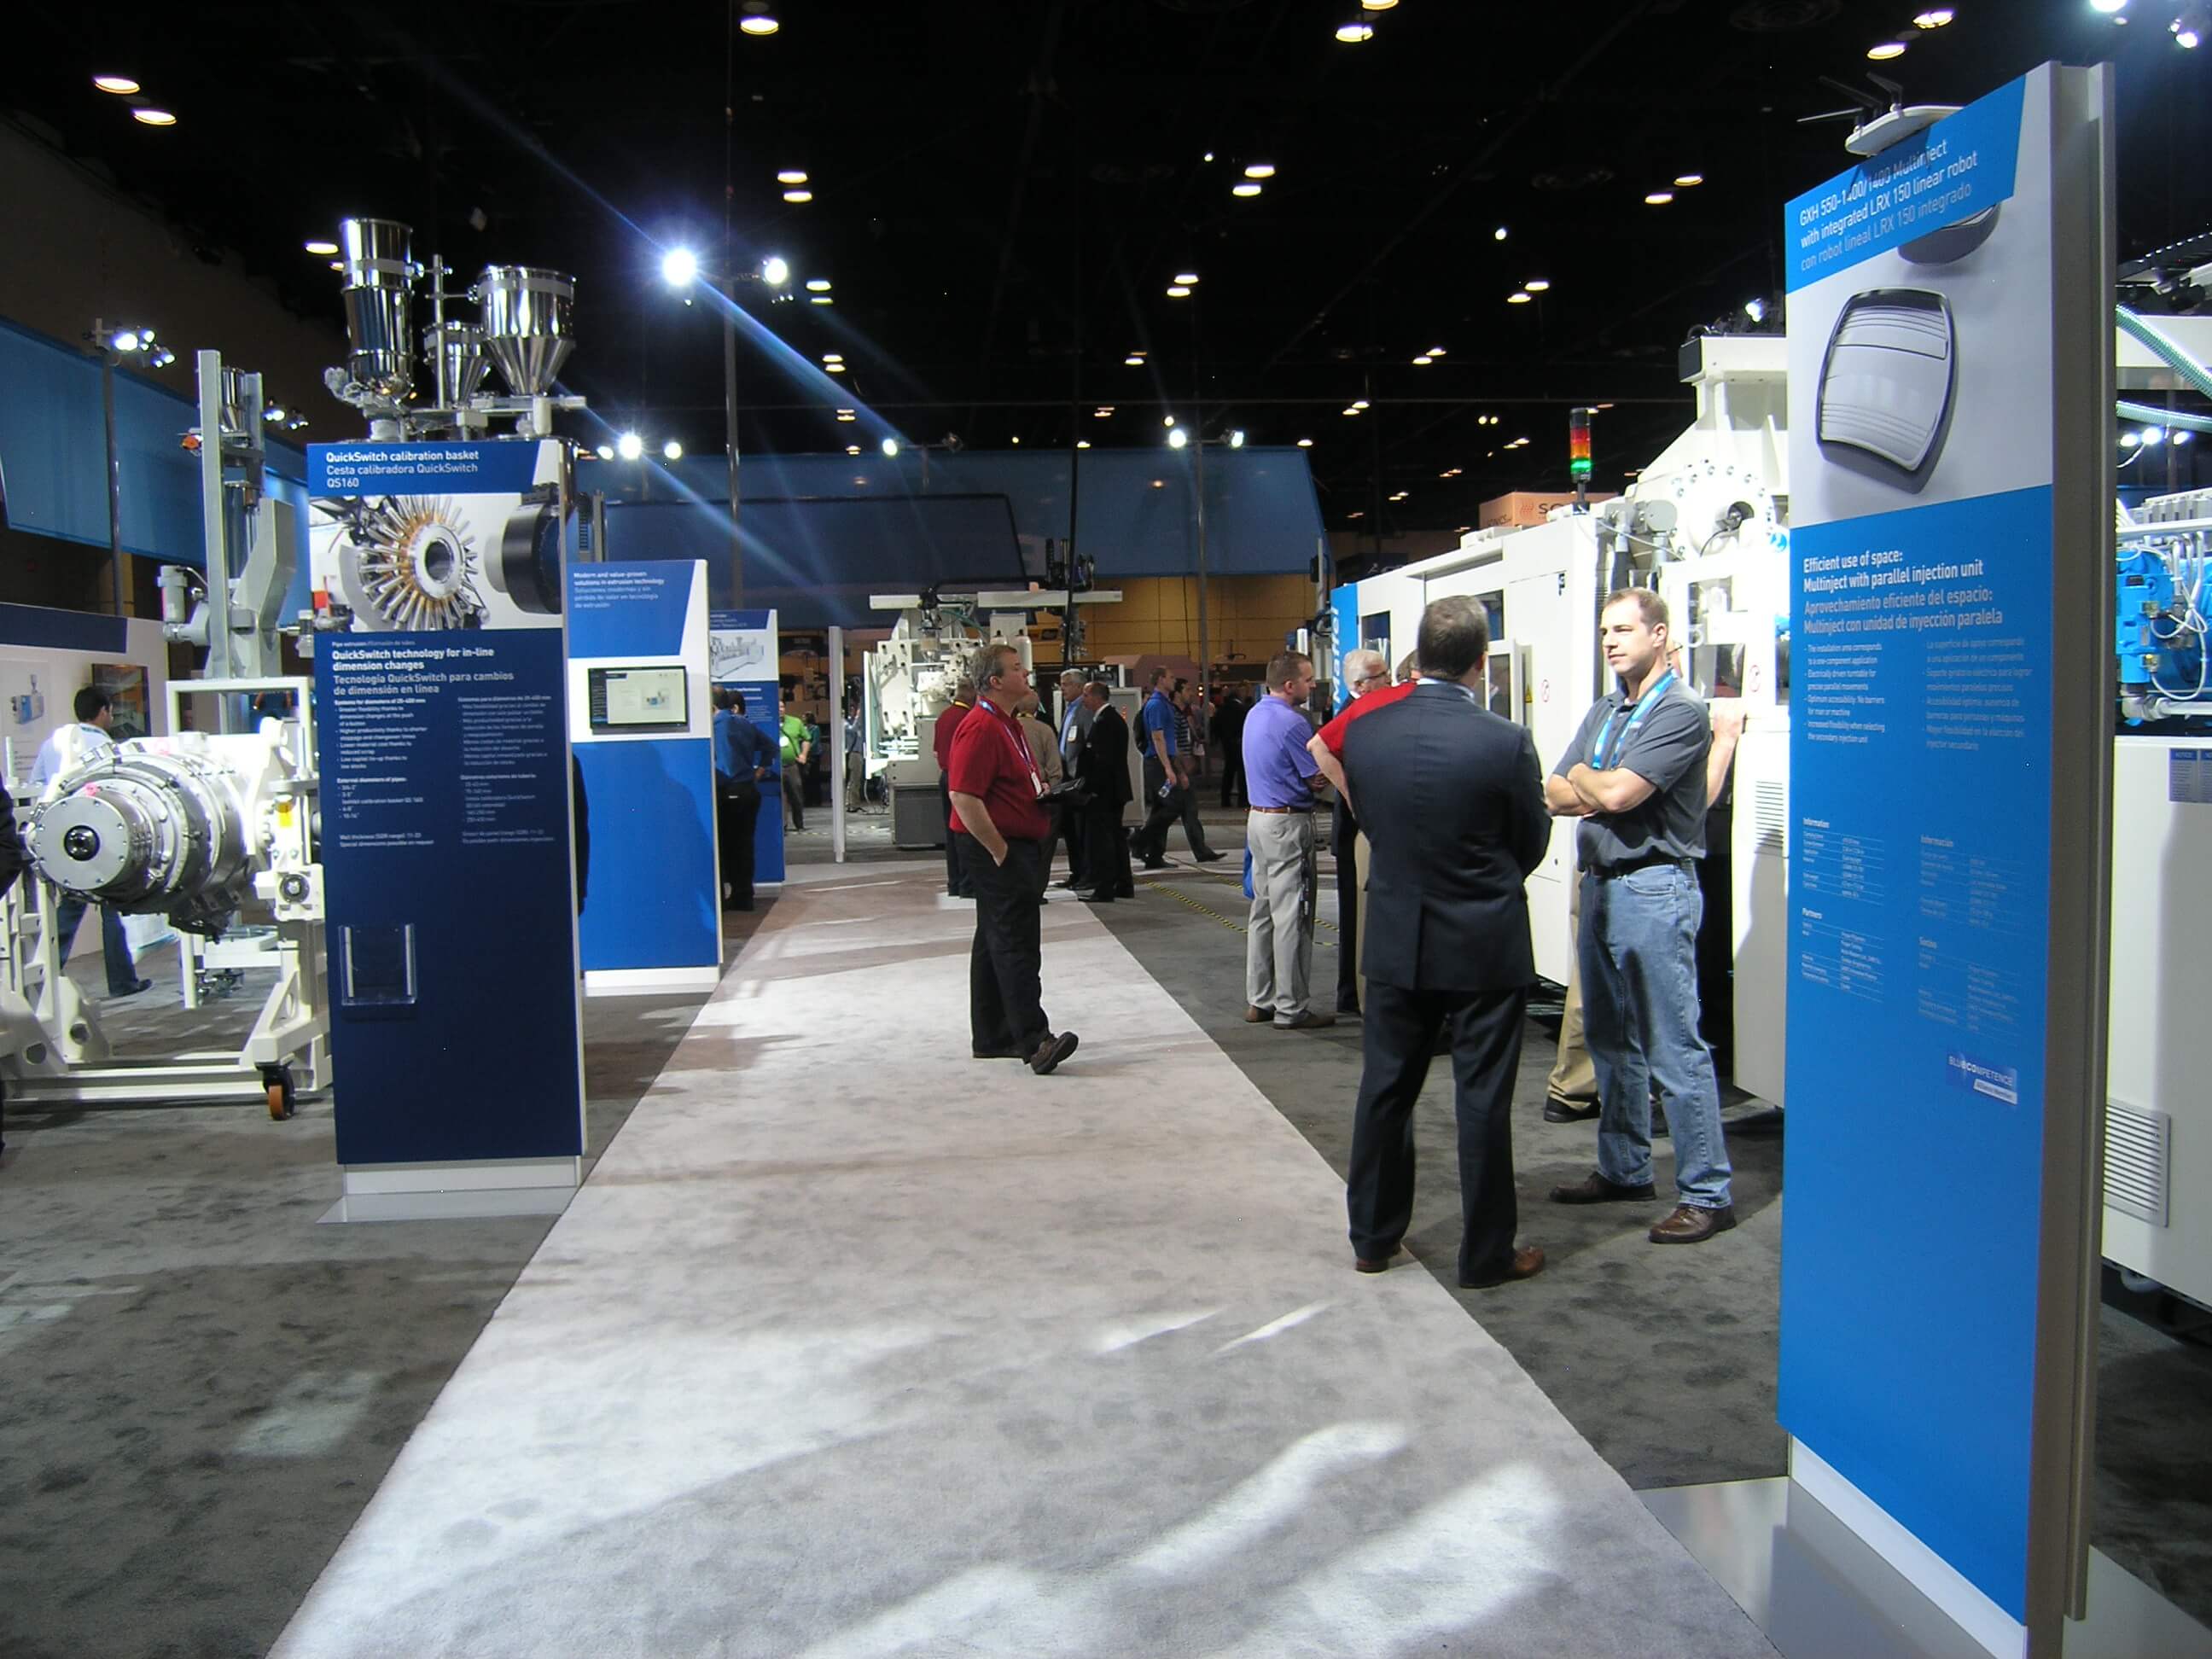 Large products displayed in trade show exhibit with graphic kiosks